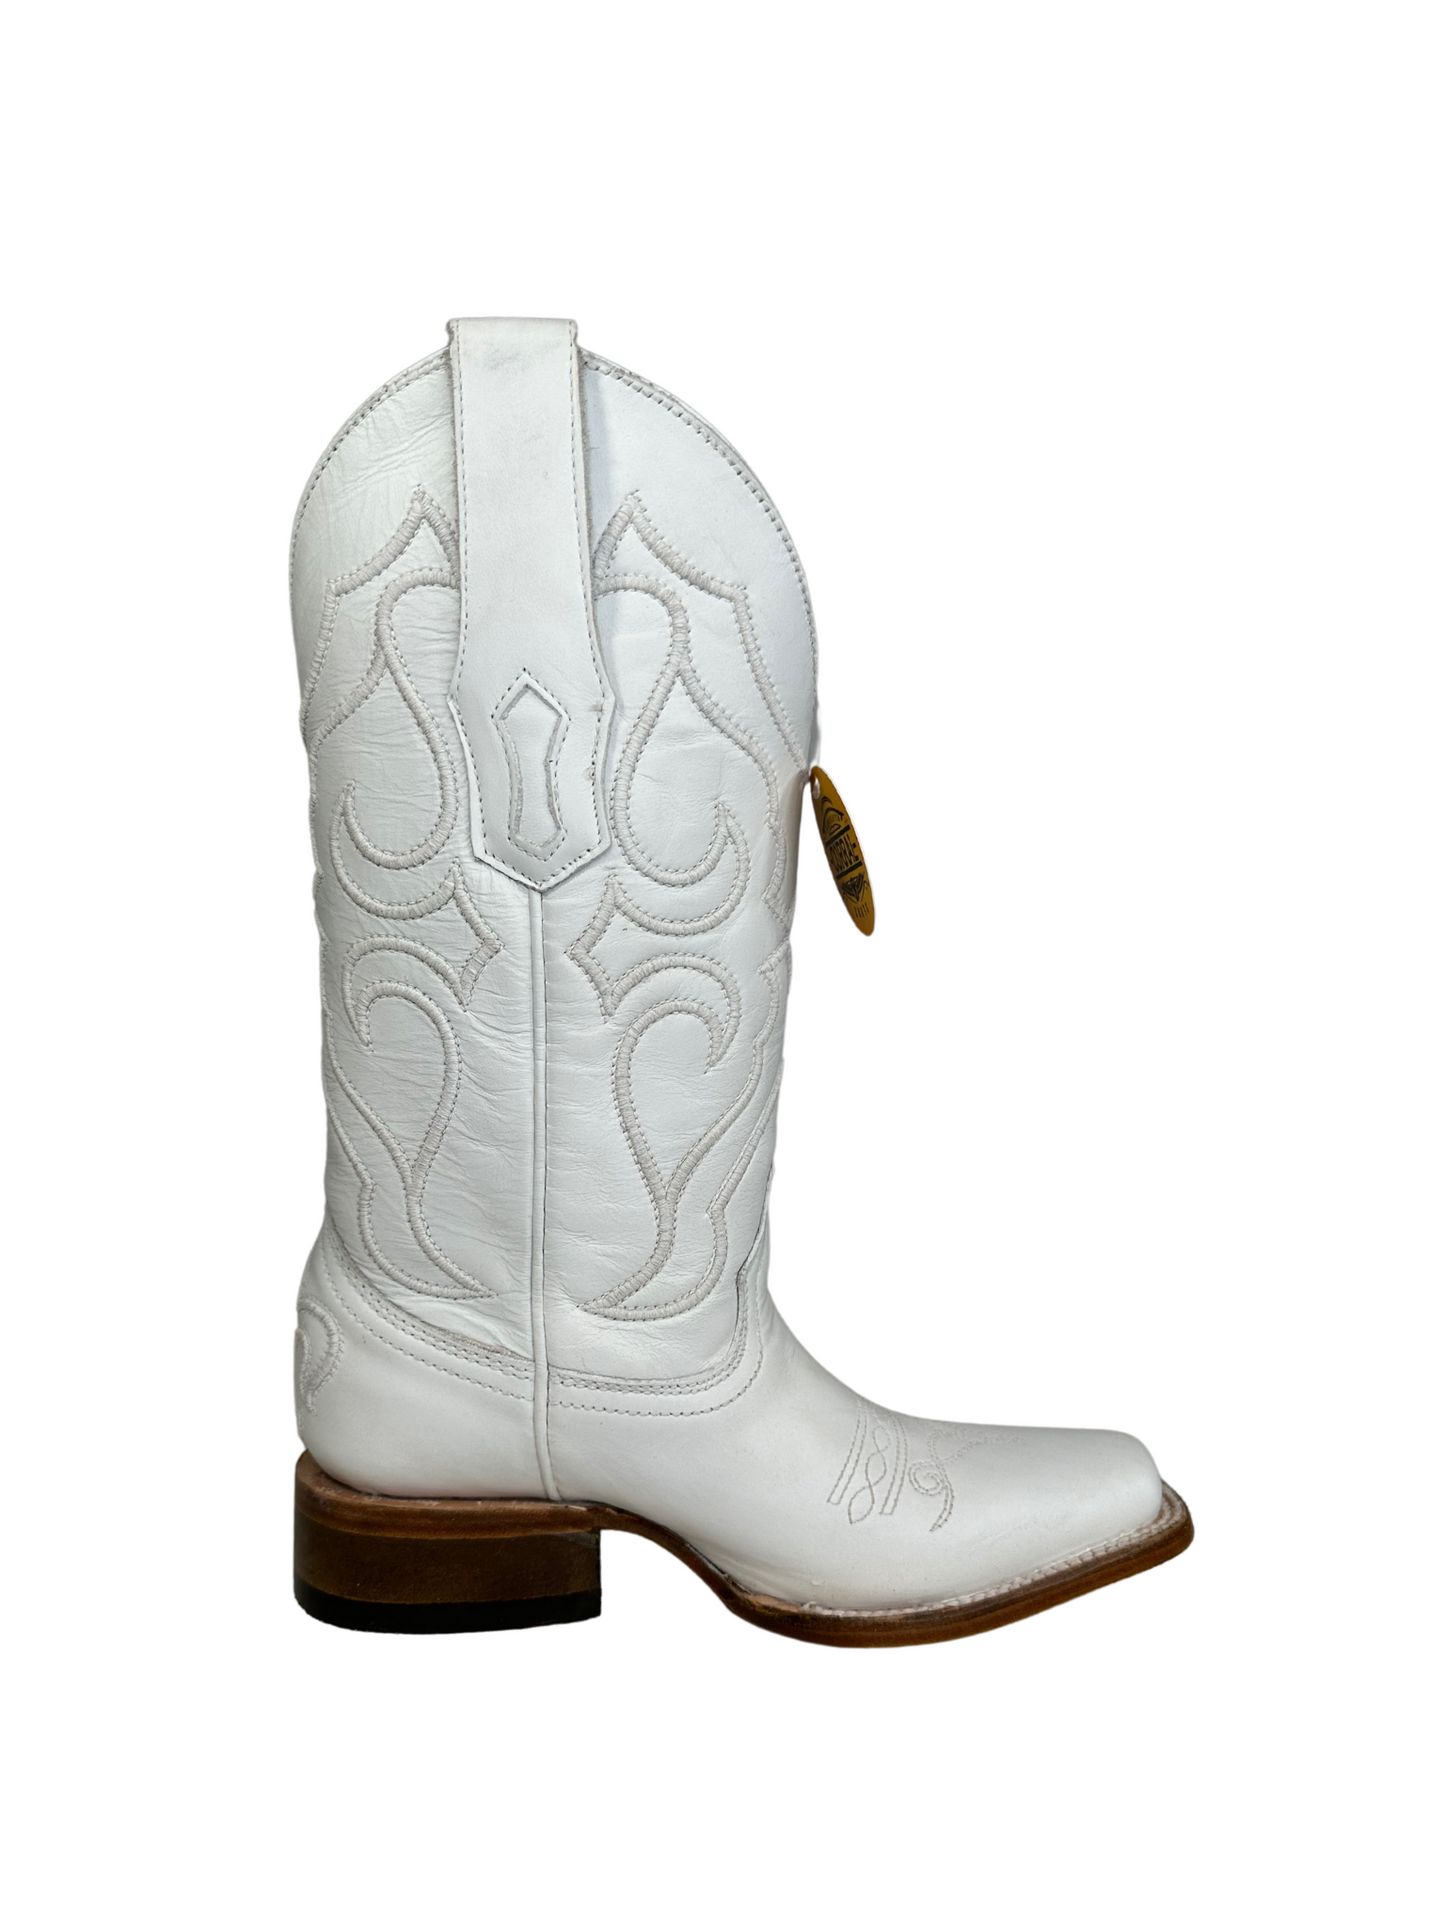 Corral Women's White Leather Embroided Square Toe Boot